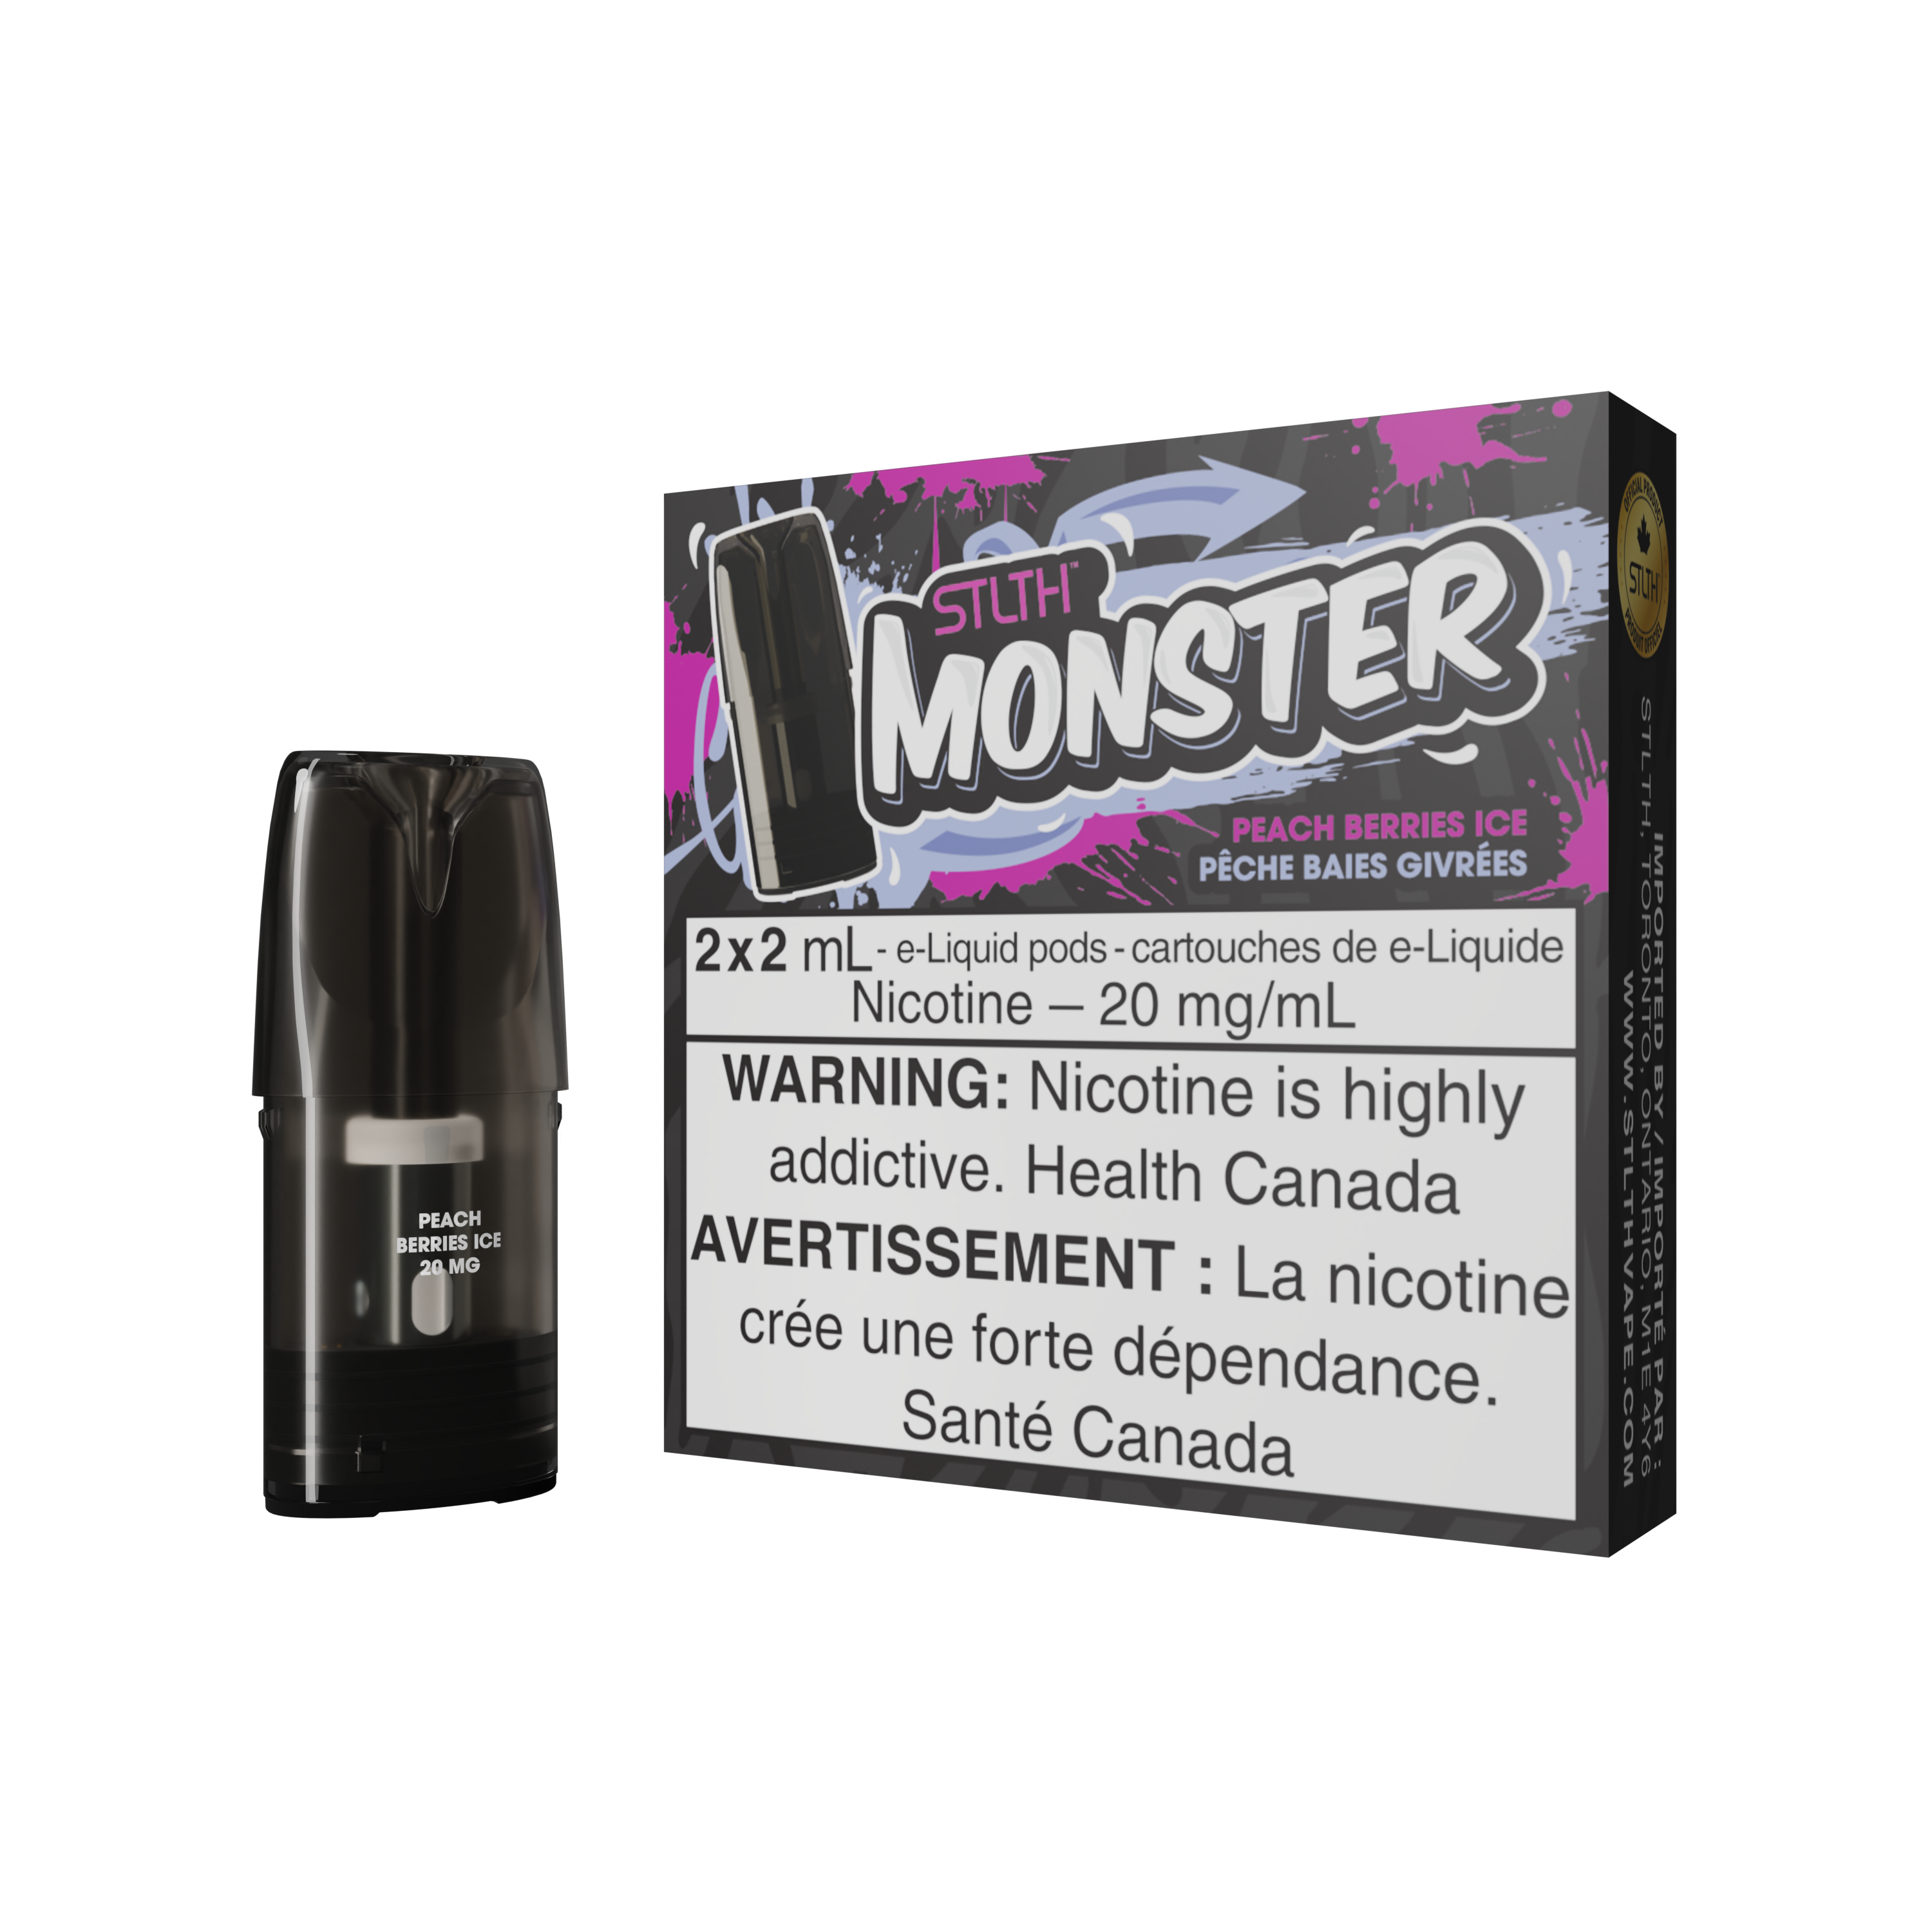 STLTH MONSTER PODS-: PEACH BERRIES ICE